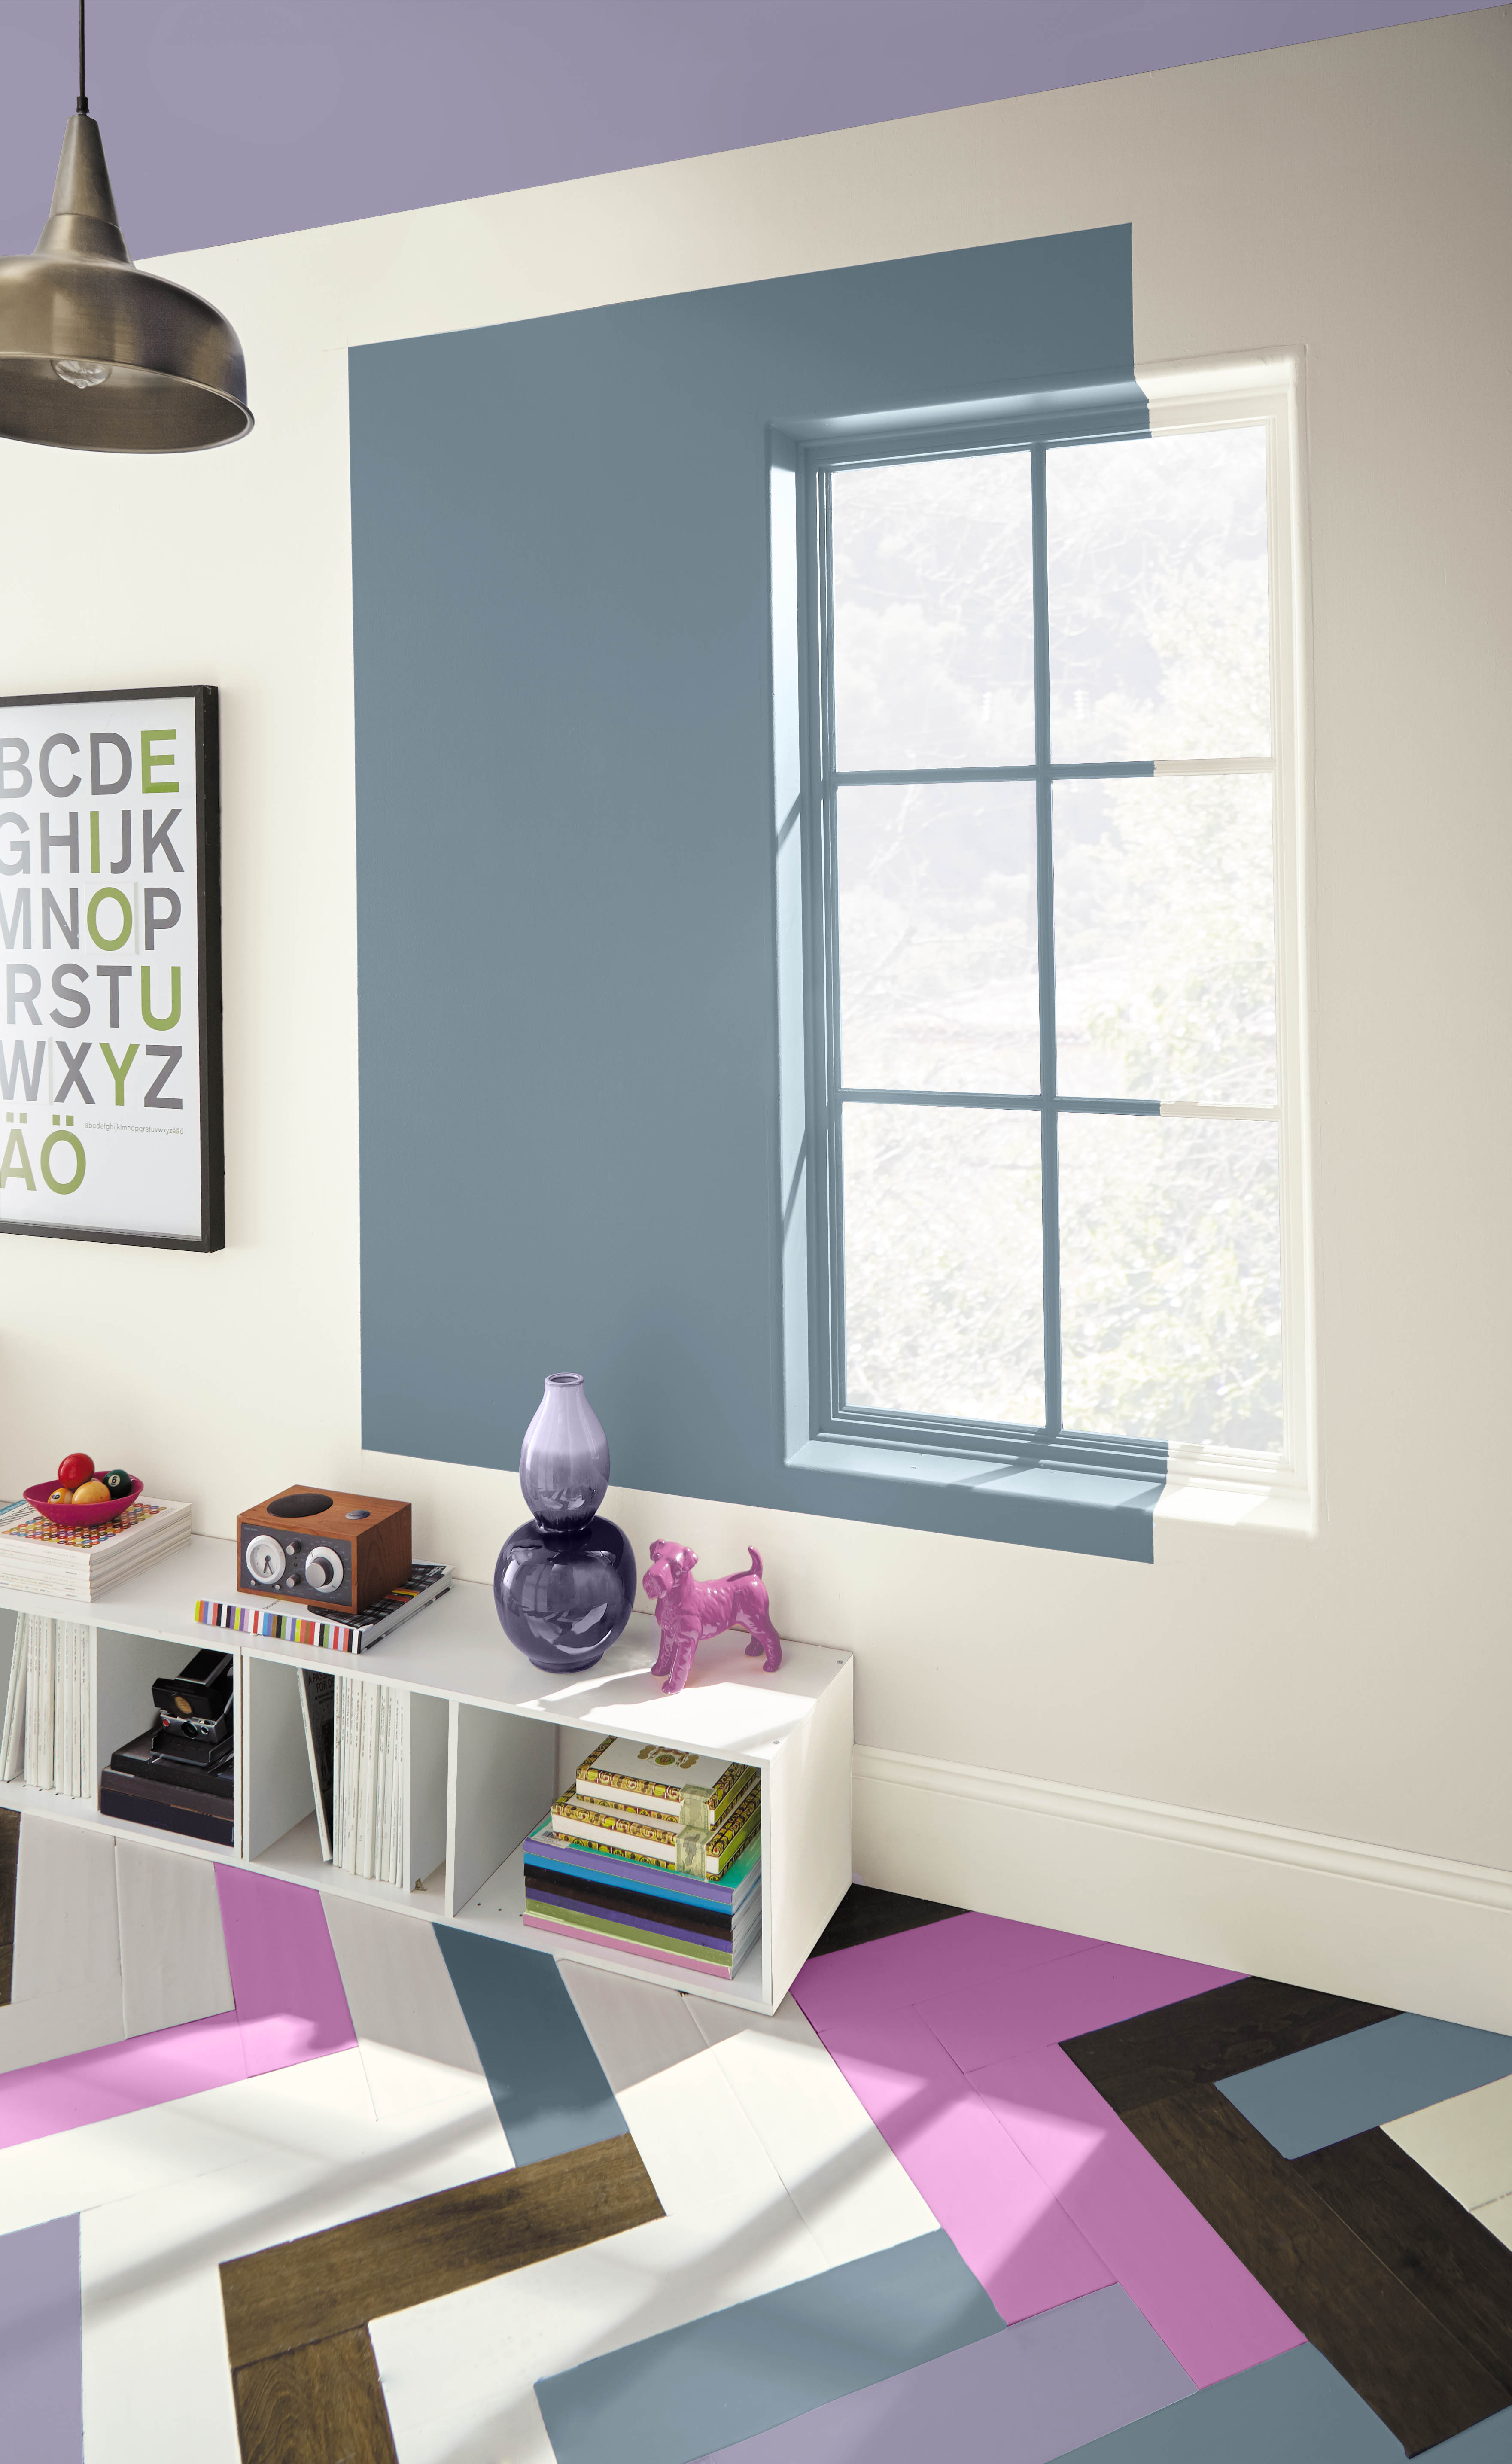 An eclectic playroom with blue, purple, and magenta accents